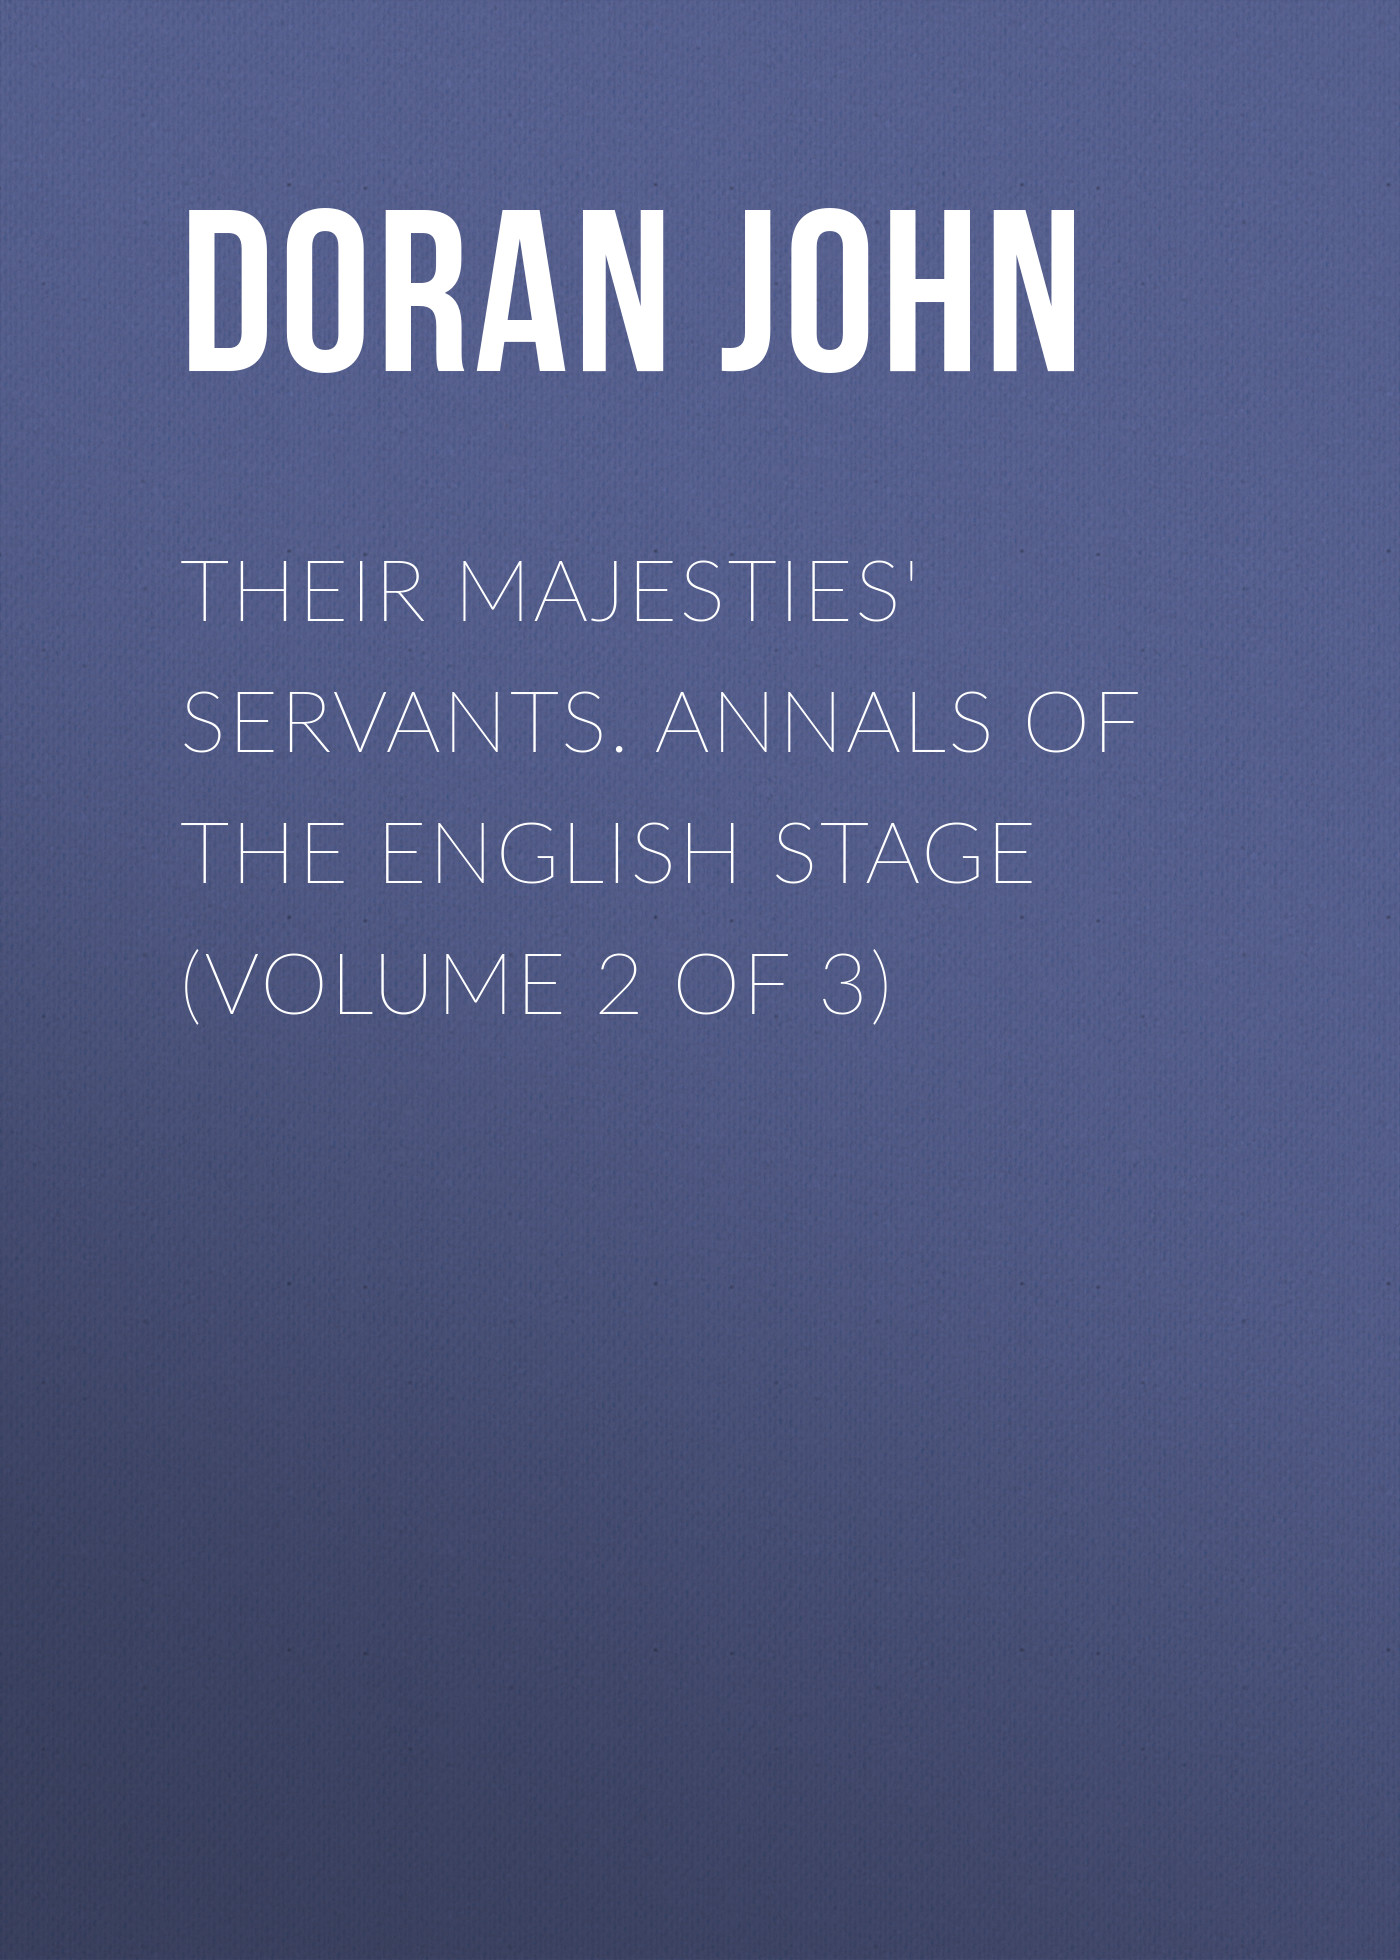 Their Majesties'Servants. Annals of the English Stage (Volume 2 of 3)